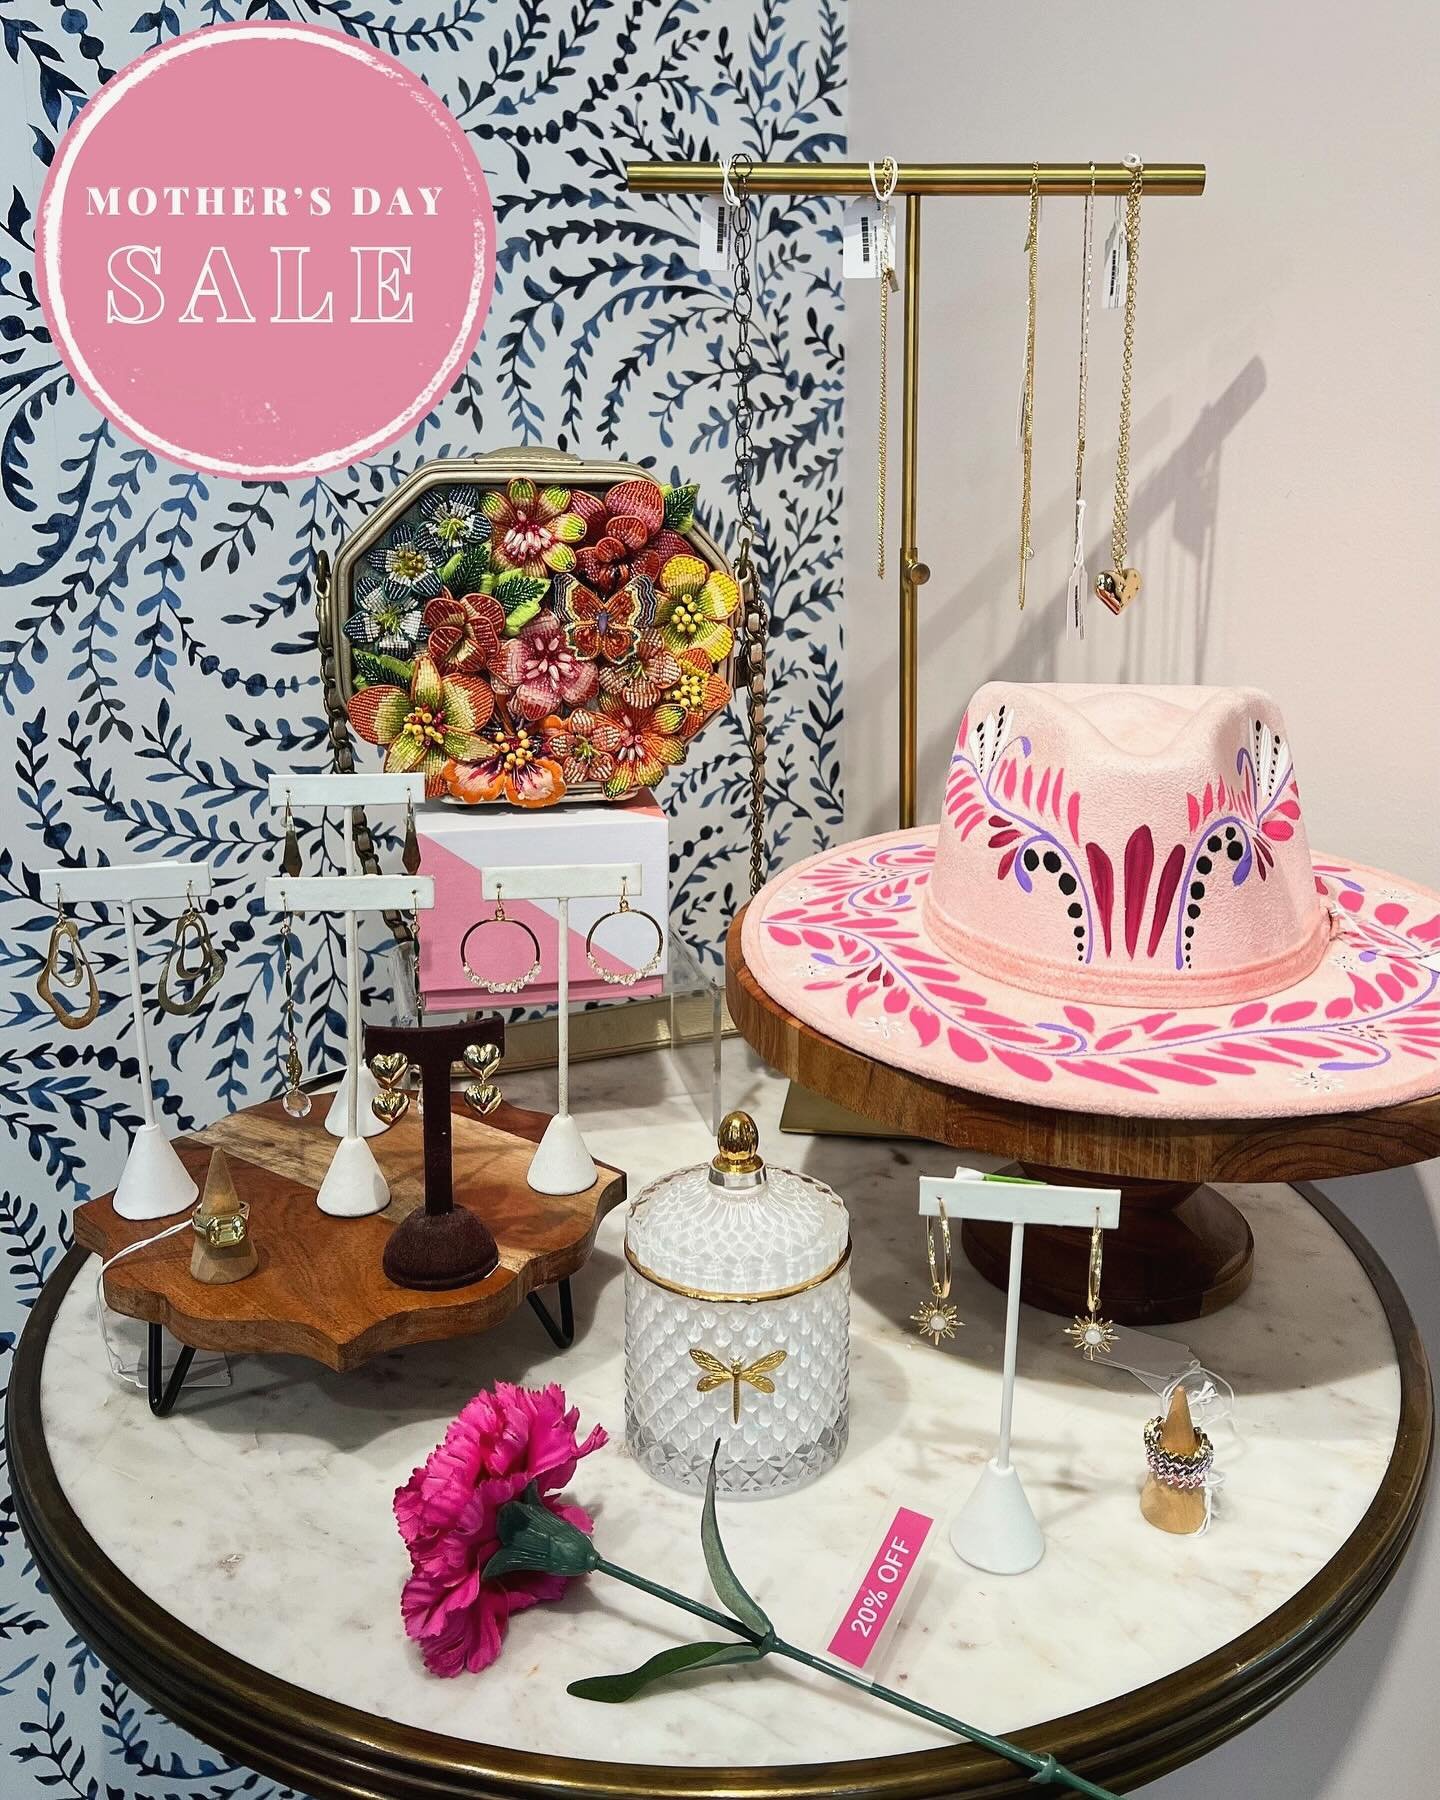 Our Pick-a-Flower Mother&rsquo;s Day SALE is happening in store now! Get your mom (or yourself) a unique gift they will love this Mother&rsquo;s Day 💕💐💗

Shop from our collection of jewelry, handbags, candles and more! Swipe for more details 👉